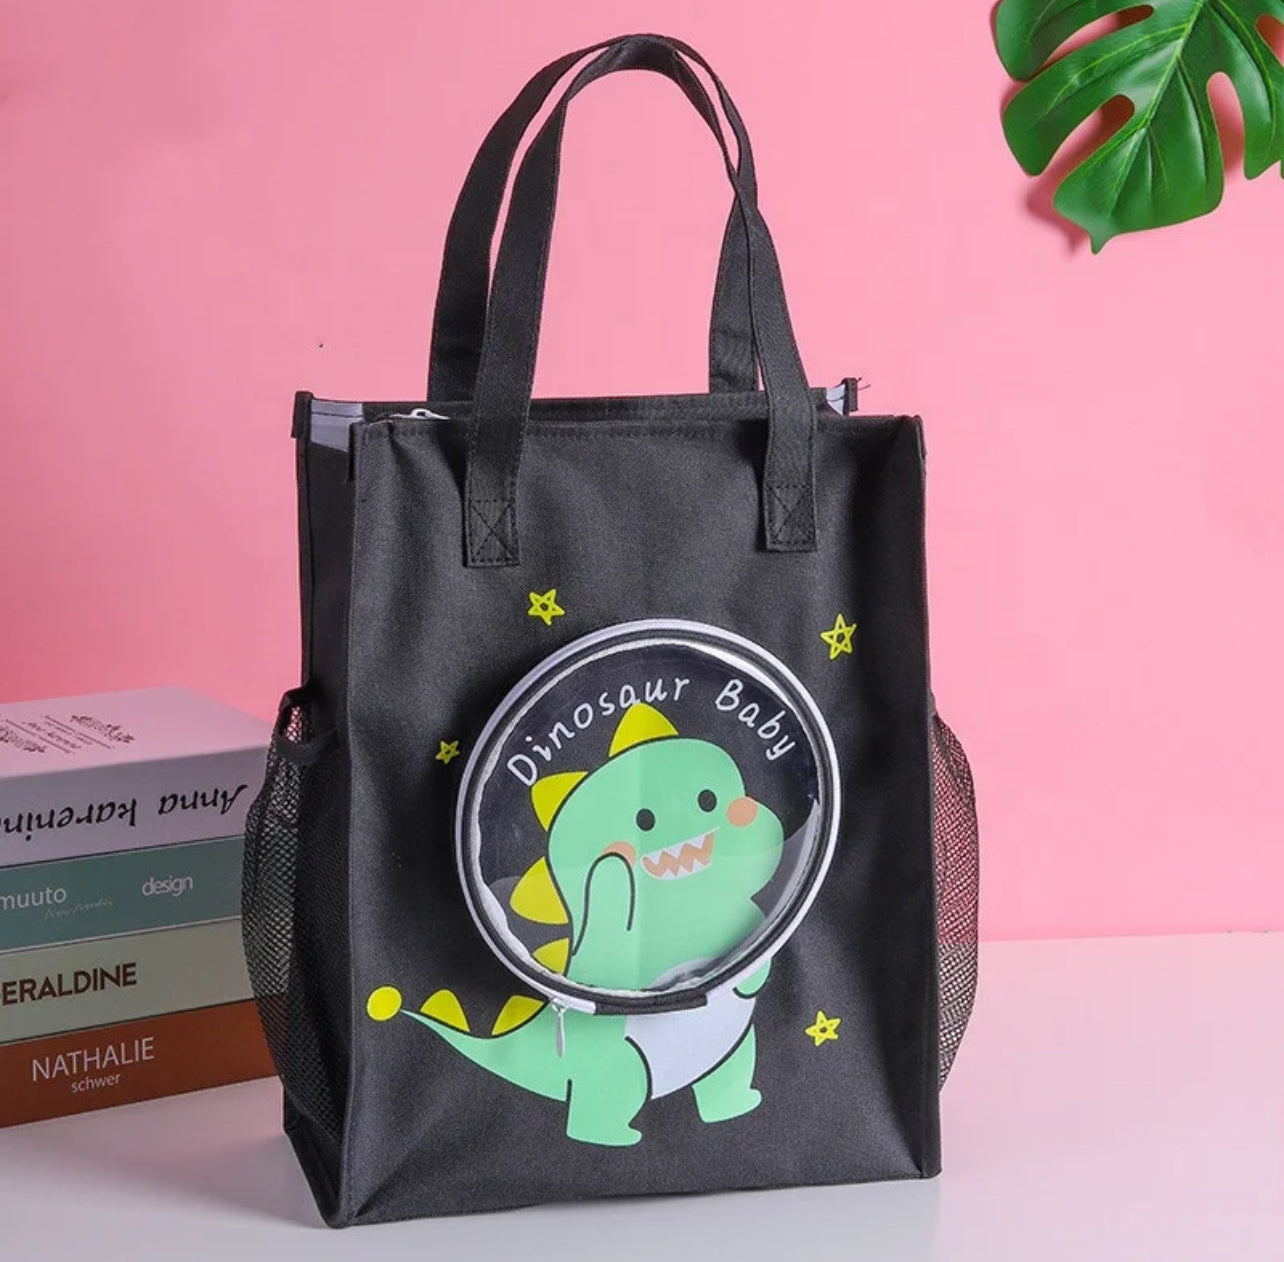 Tuition Tote Bag